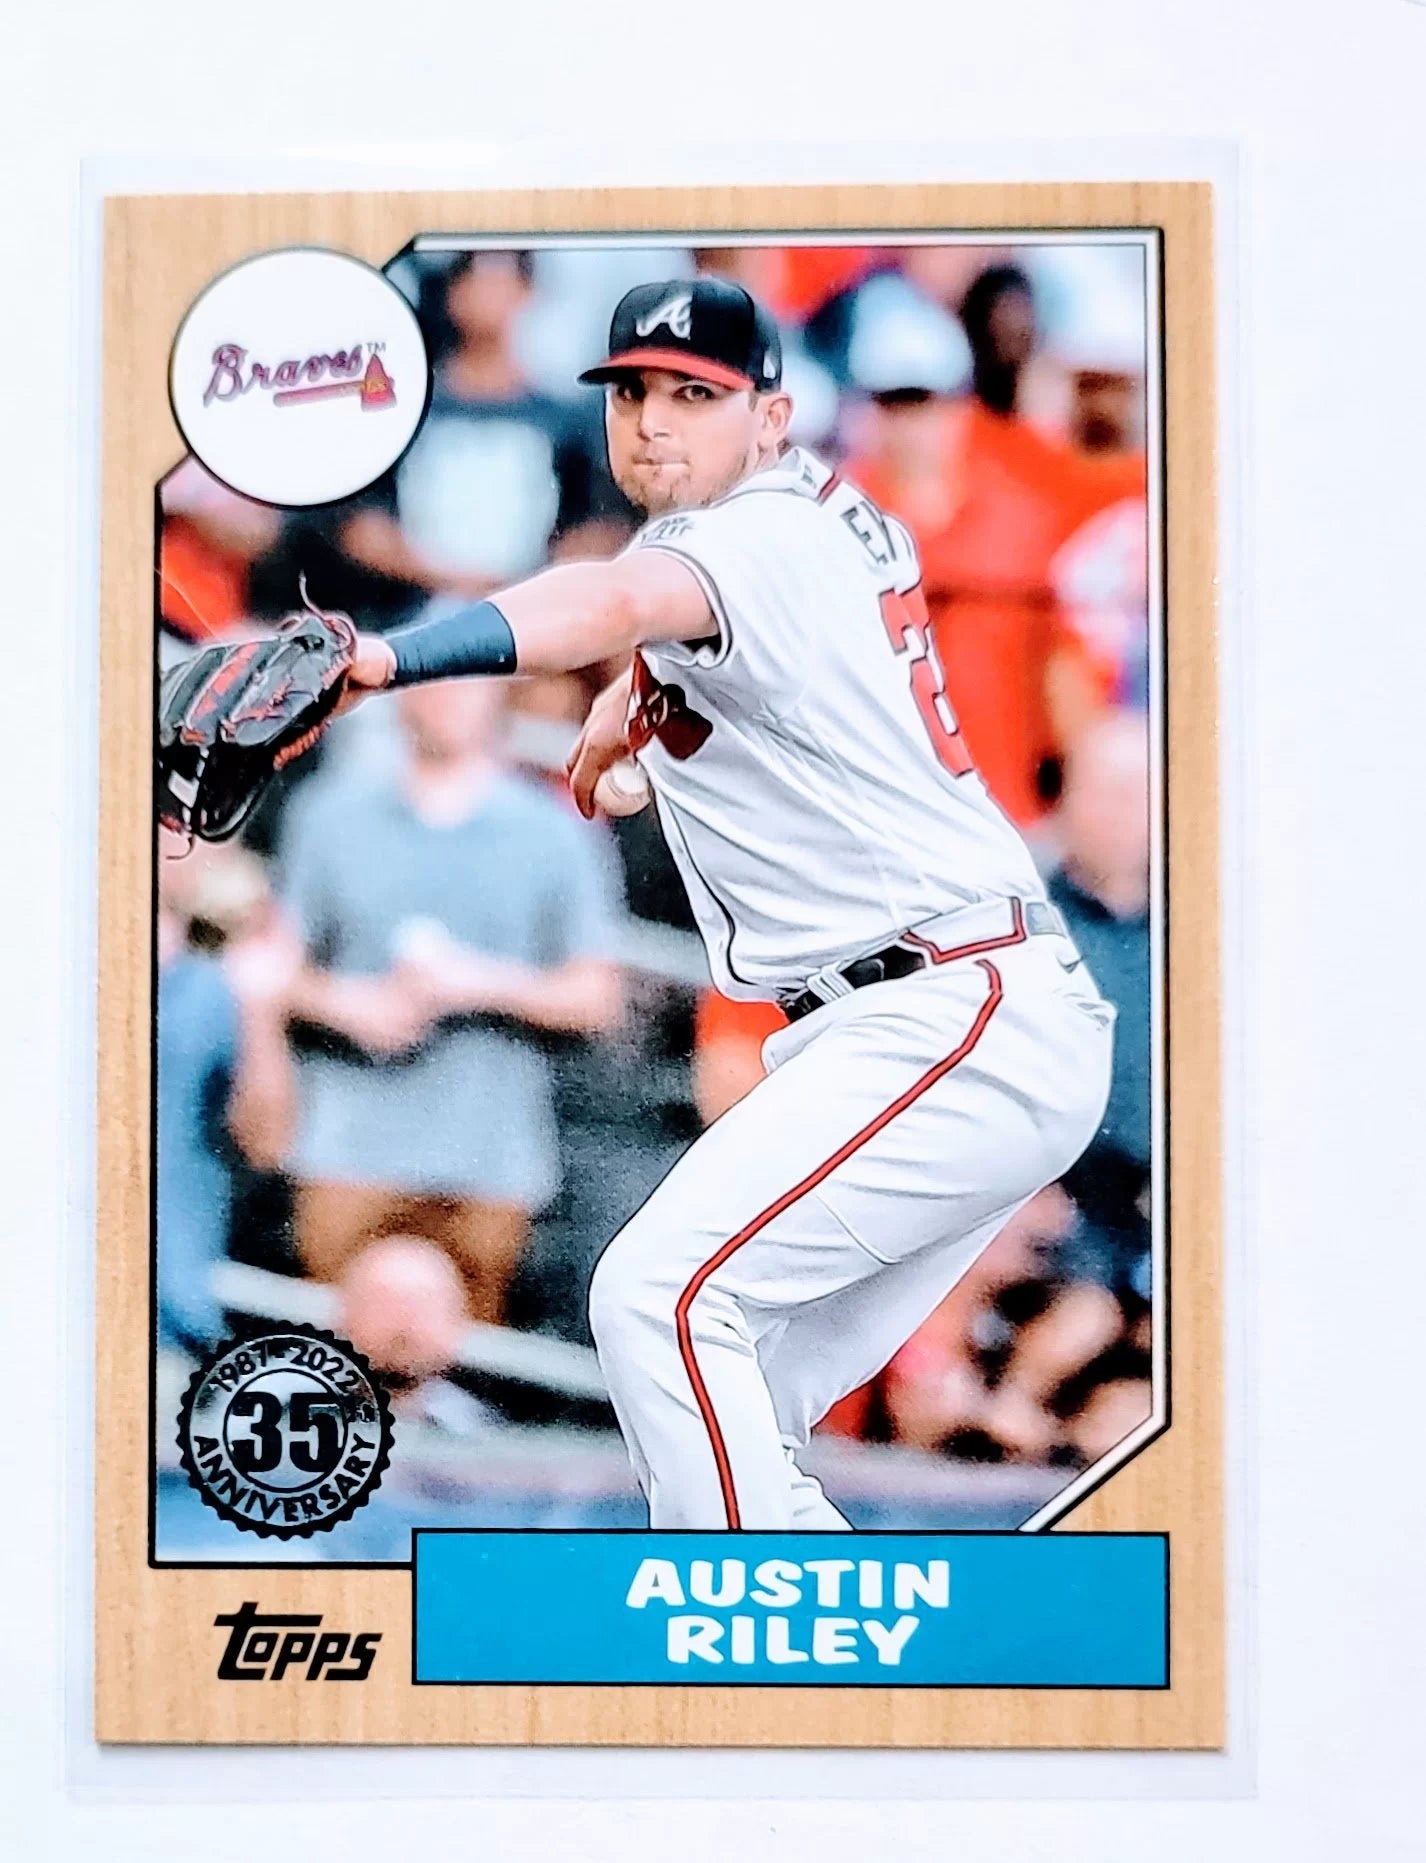 2022 Topps Austin Riley 1987 35th Anniversary Baseball Card AVM1 simple Xclusive Collectibles   